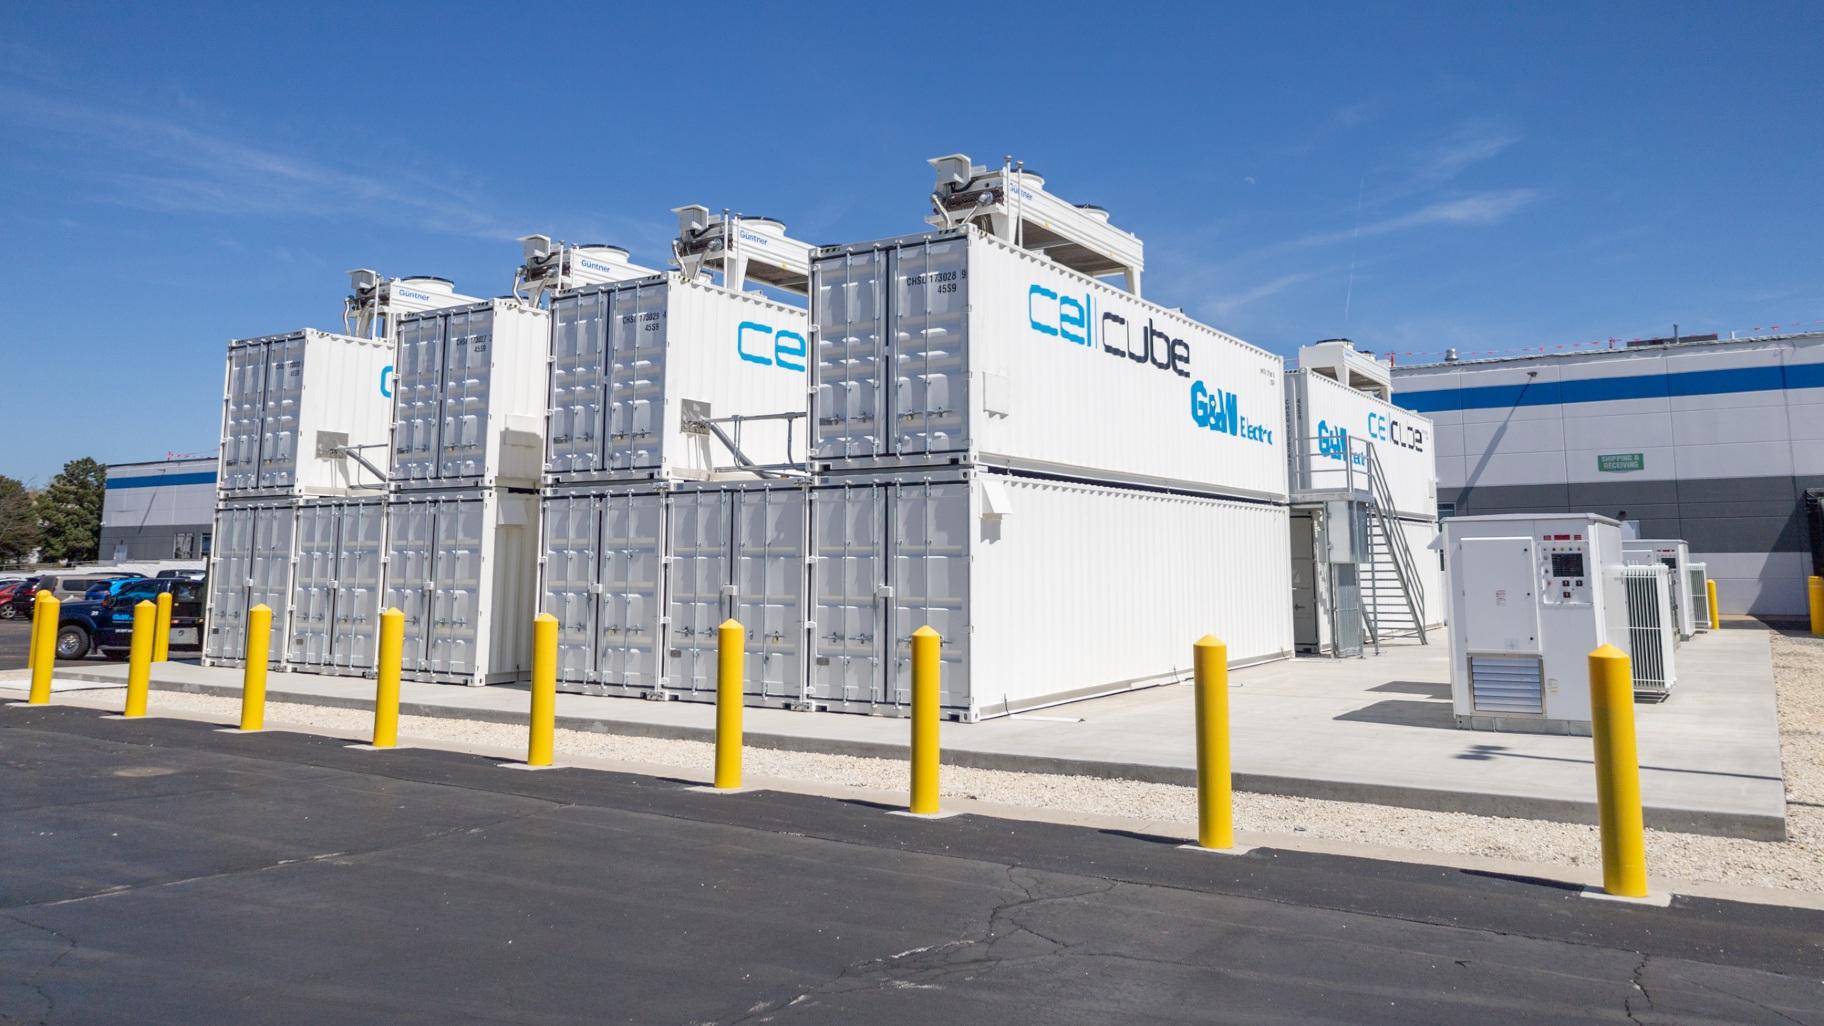 The 2-megawatt vanadium redox battery, one of the largest in the country, is pictured at G&W Electric. (Andrew Adams / Capitol News Illinois)